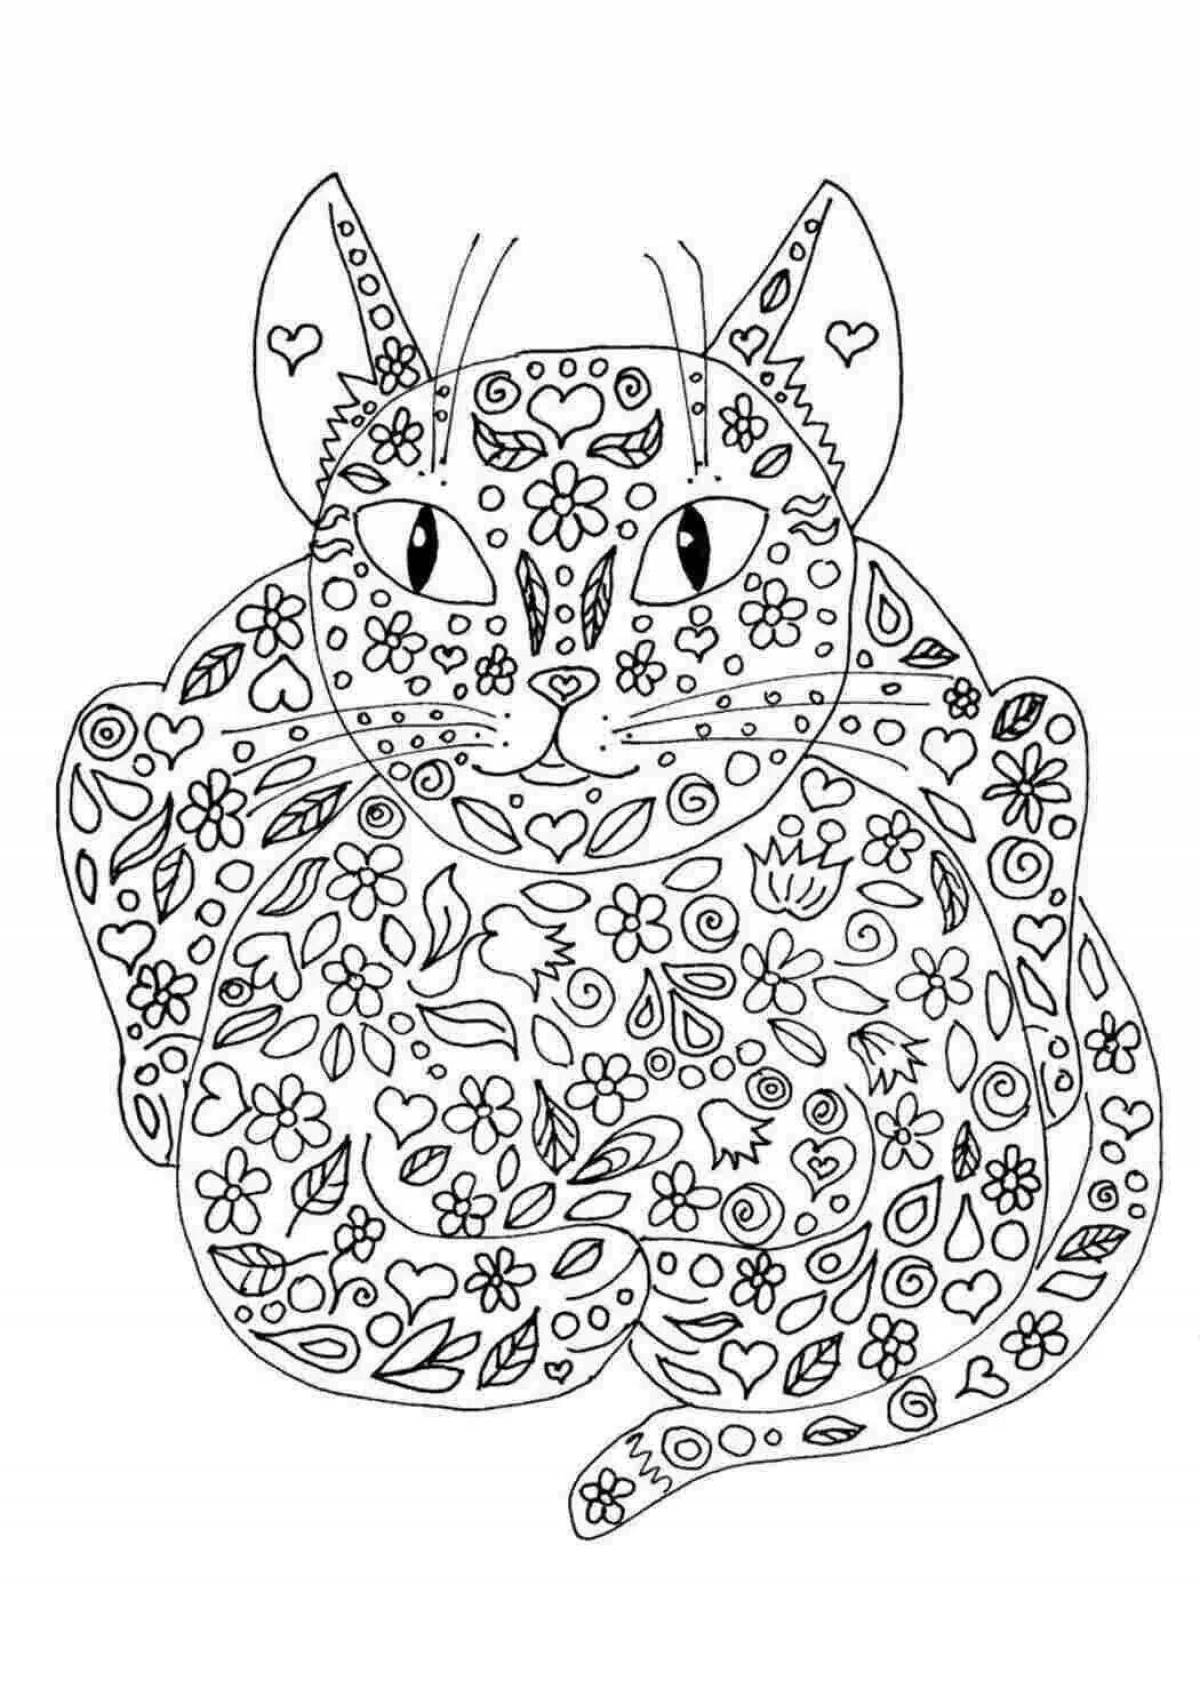 Adorable anti-stress coloring book for cat girls